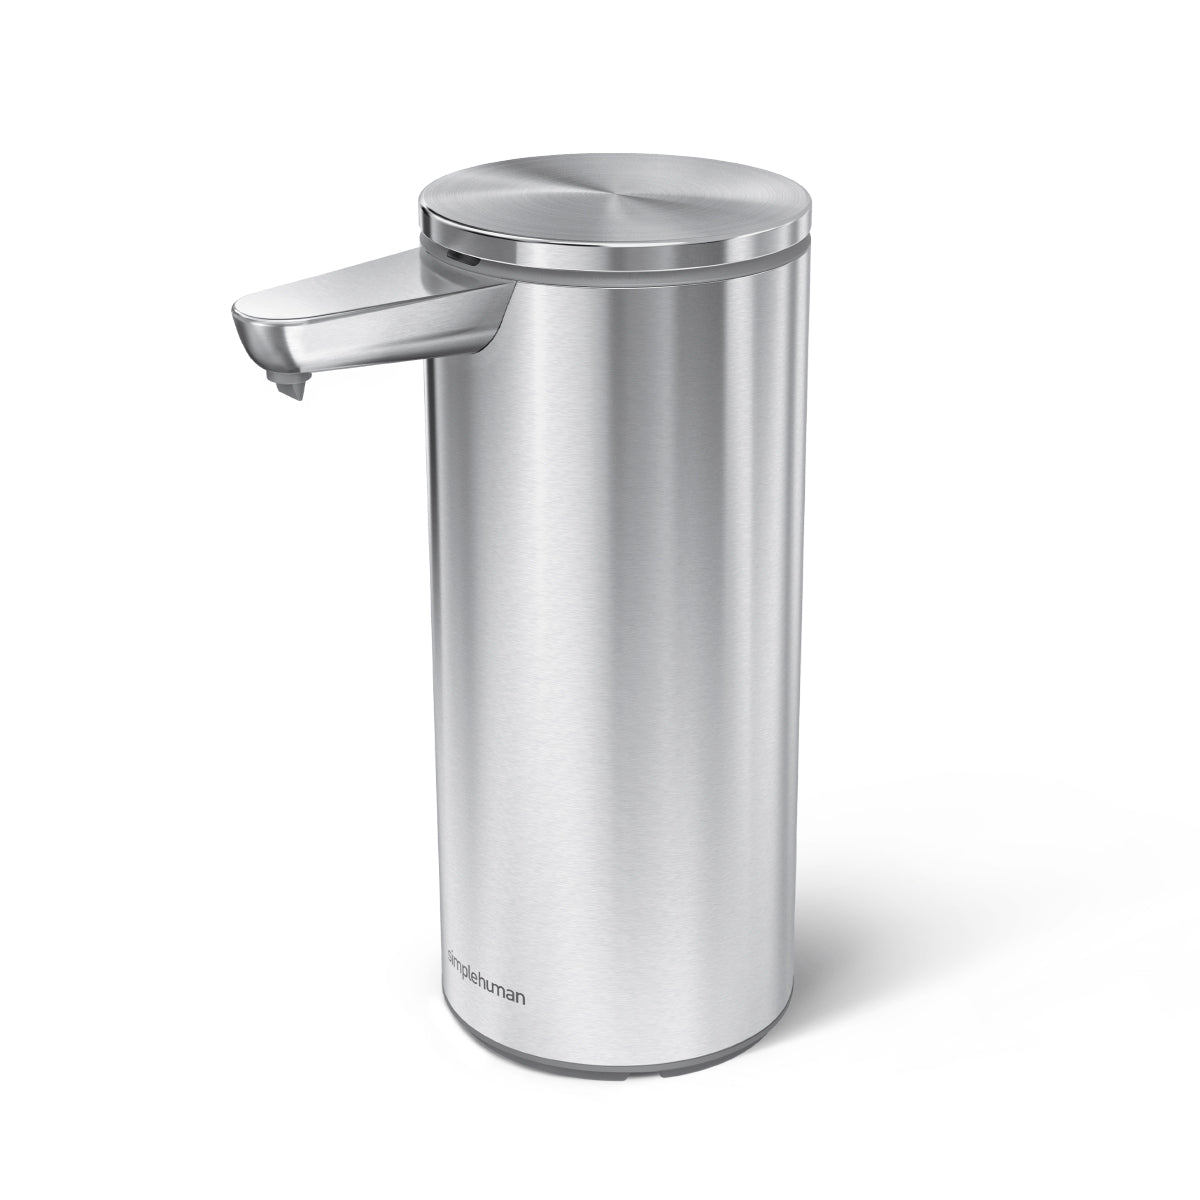 Simplehuman spring sale: 20% off trash cans, paper towel holders and soap  pumps